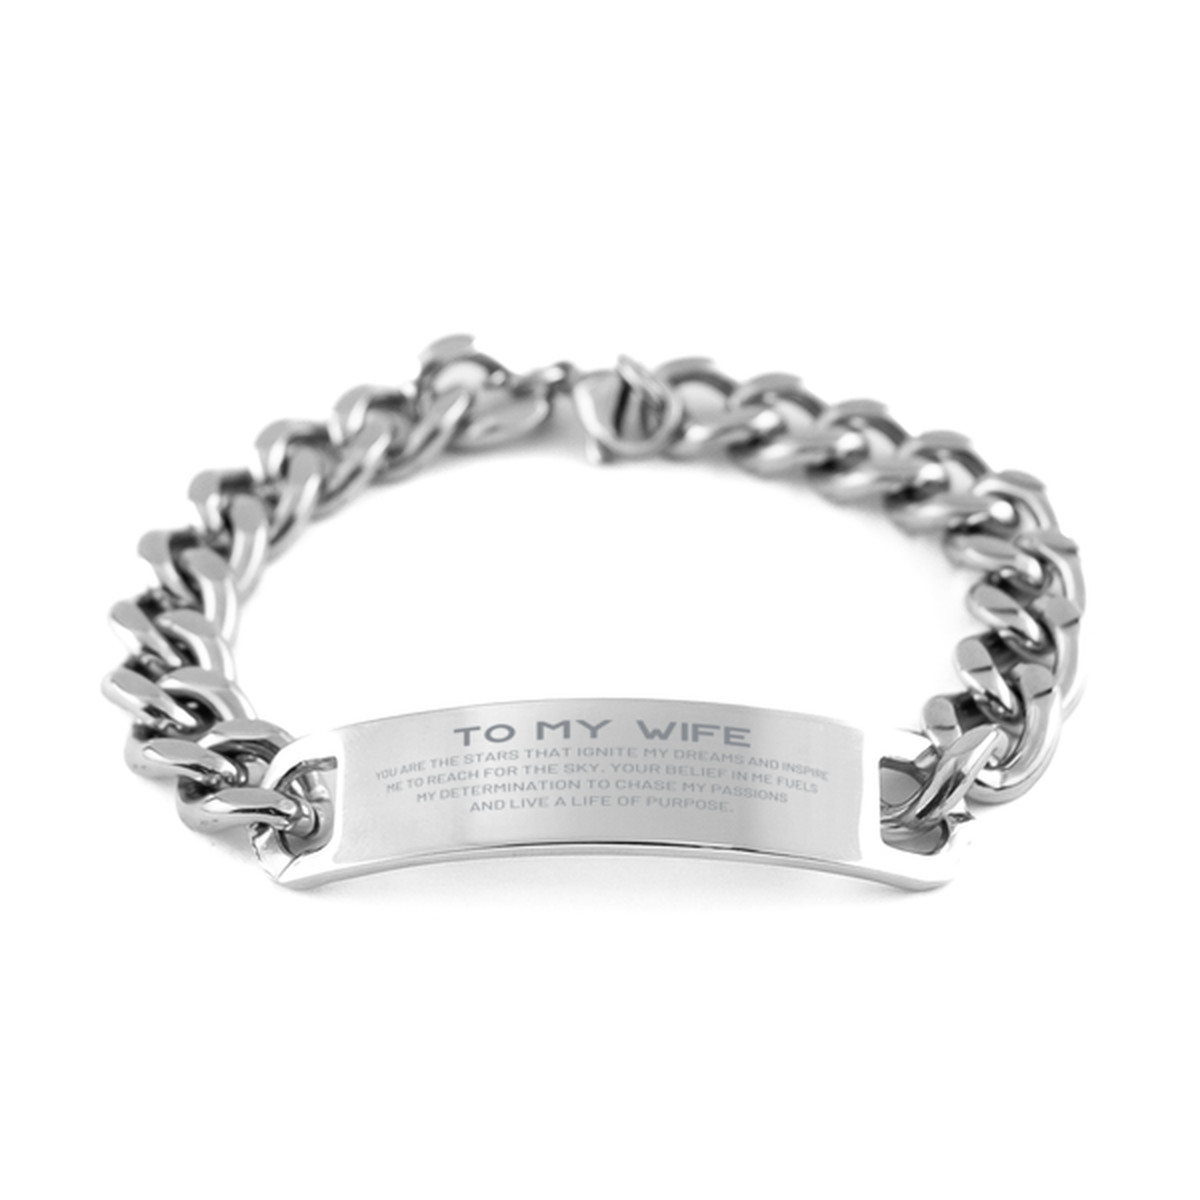 To My Wife Cuban Chain Stainless Steel Bracelet, You are the stars that ignite my dreams and inspire me to reach for the sky, Birthday Unique Gifts For Wife, Thank You Gifts For Wife